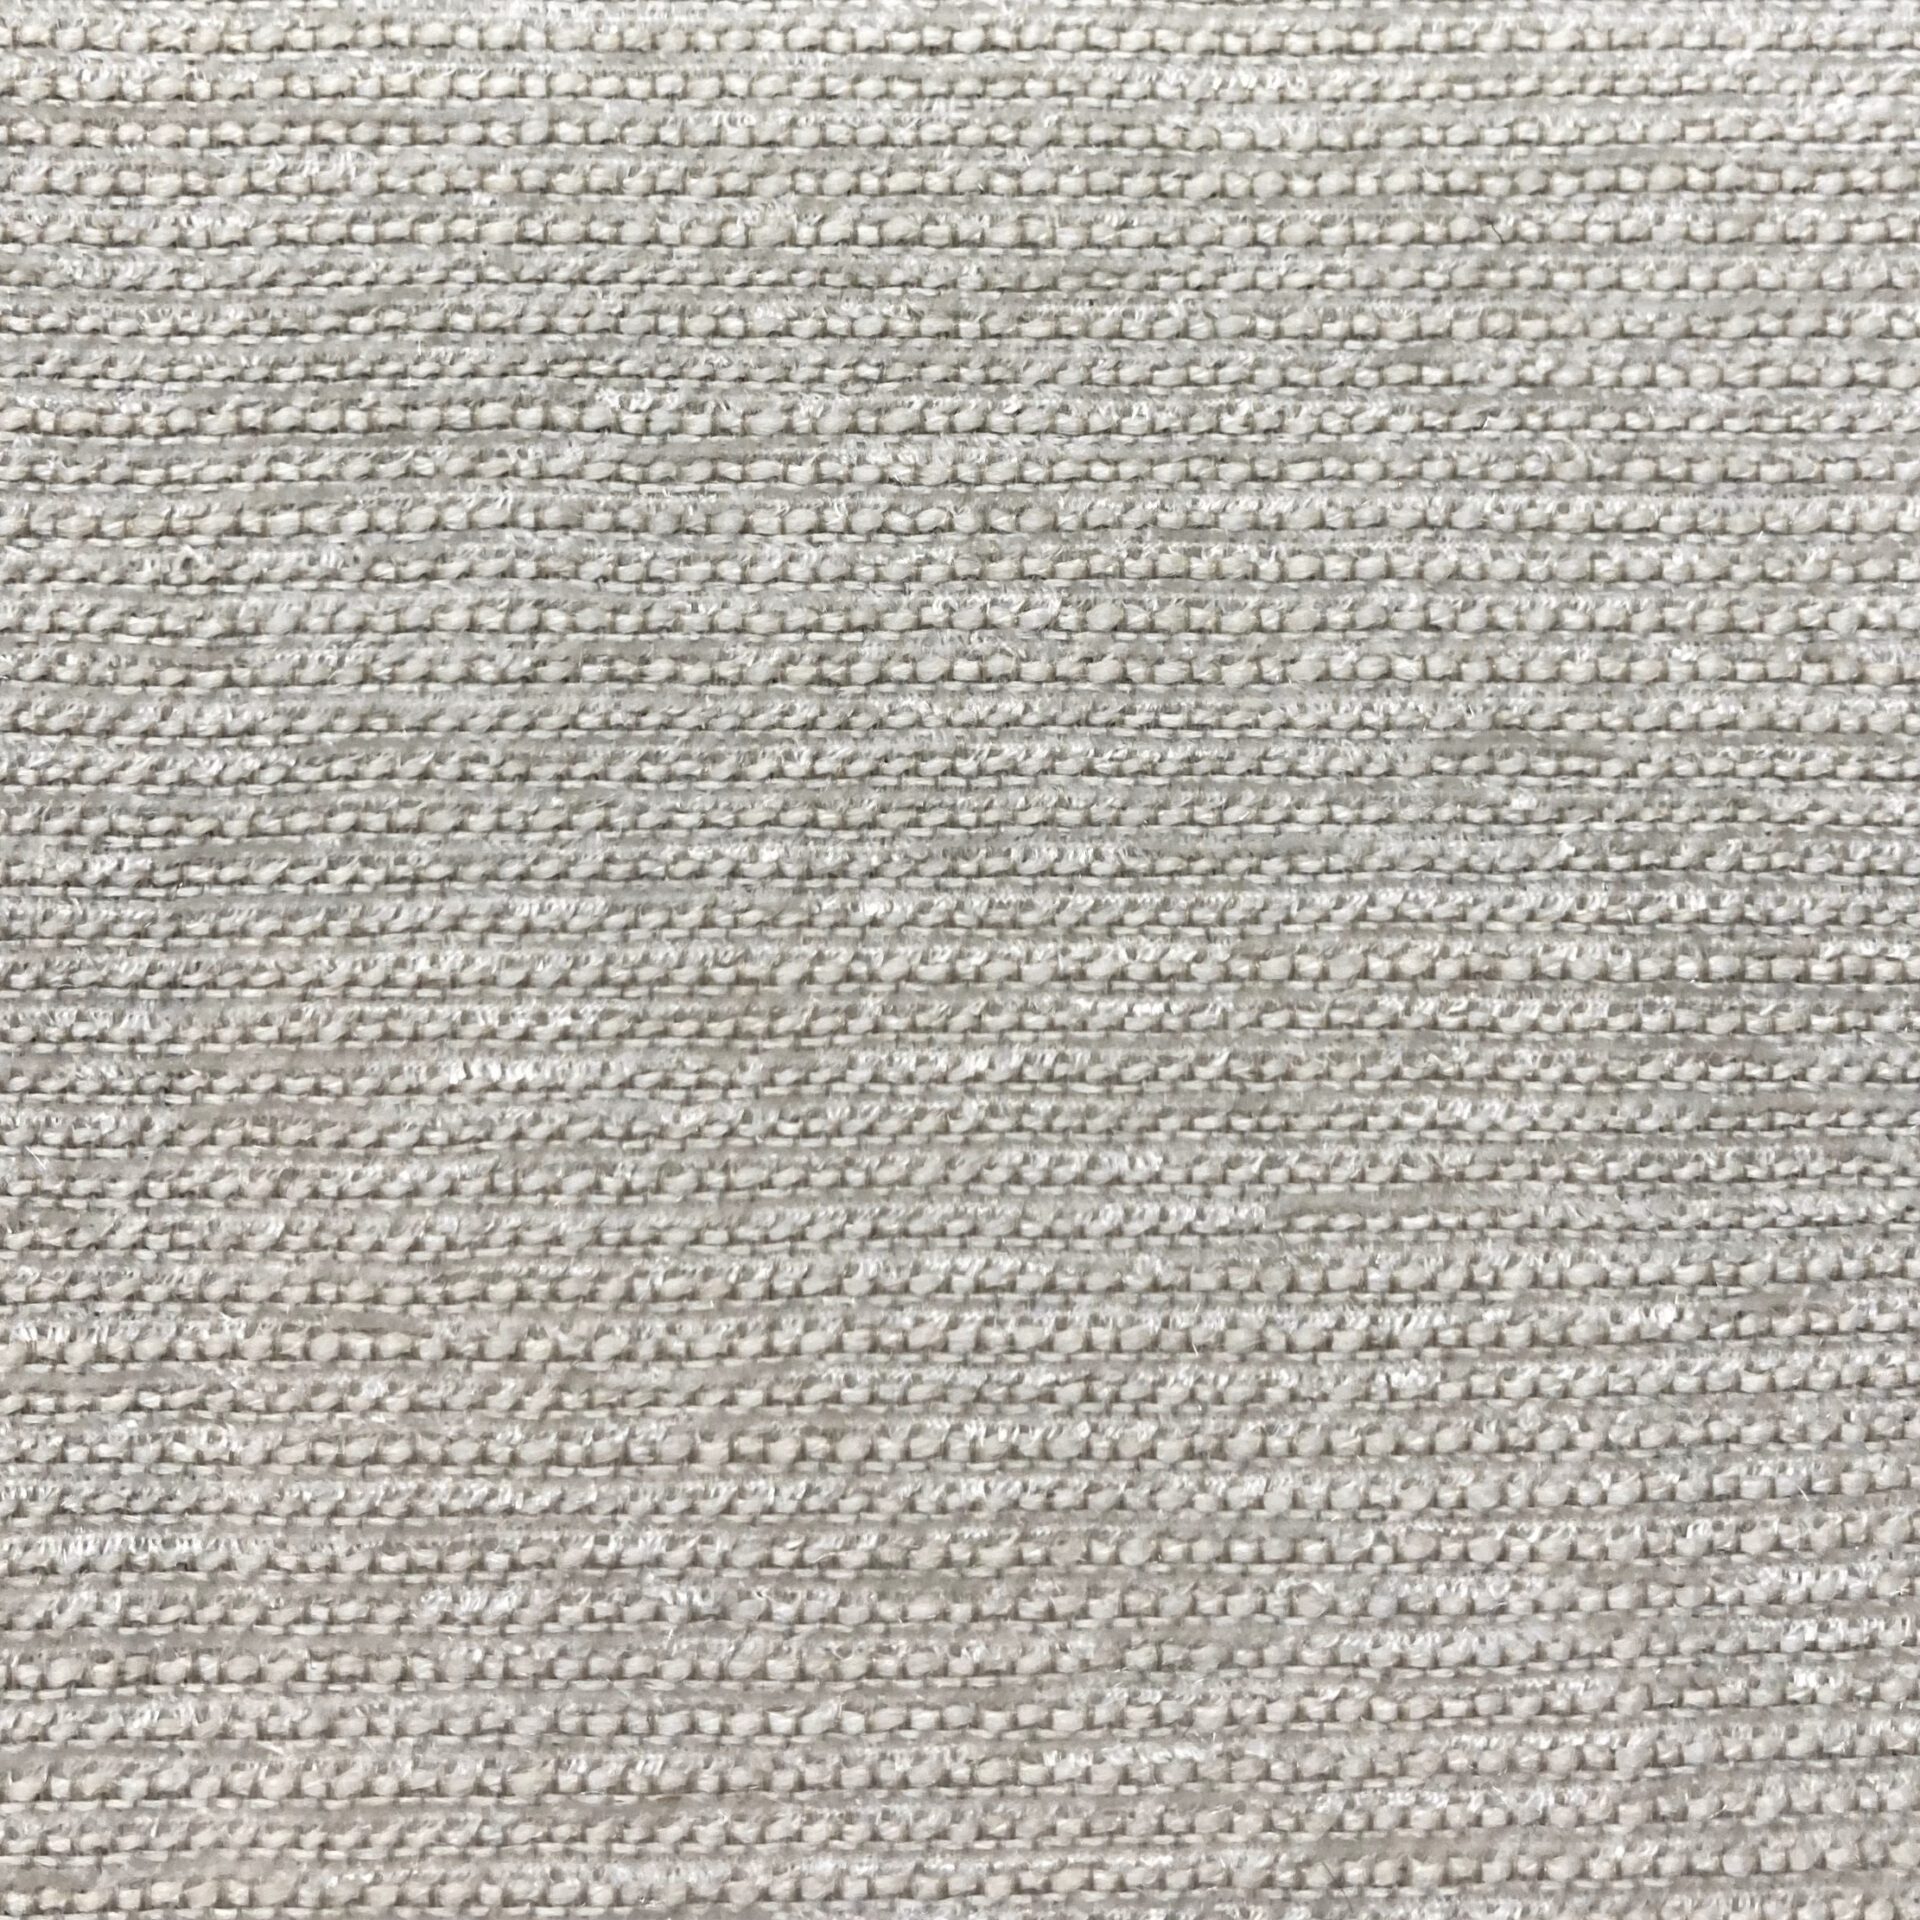 intertex-oyster-textile-blend-home-furnishings